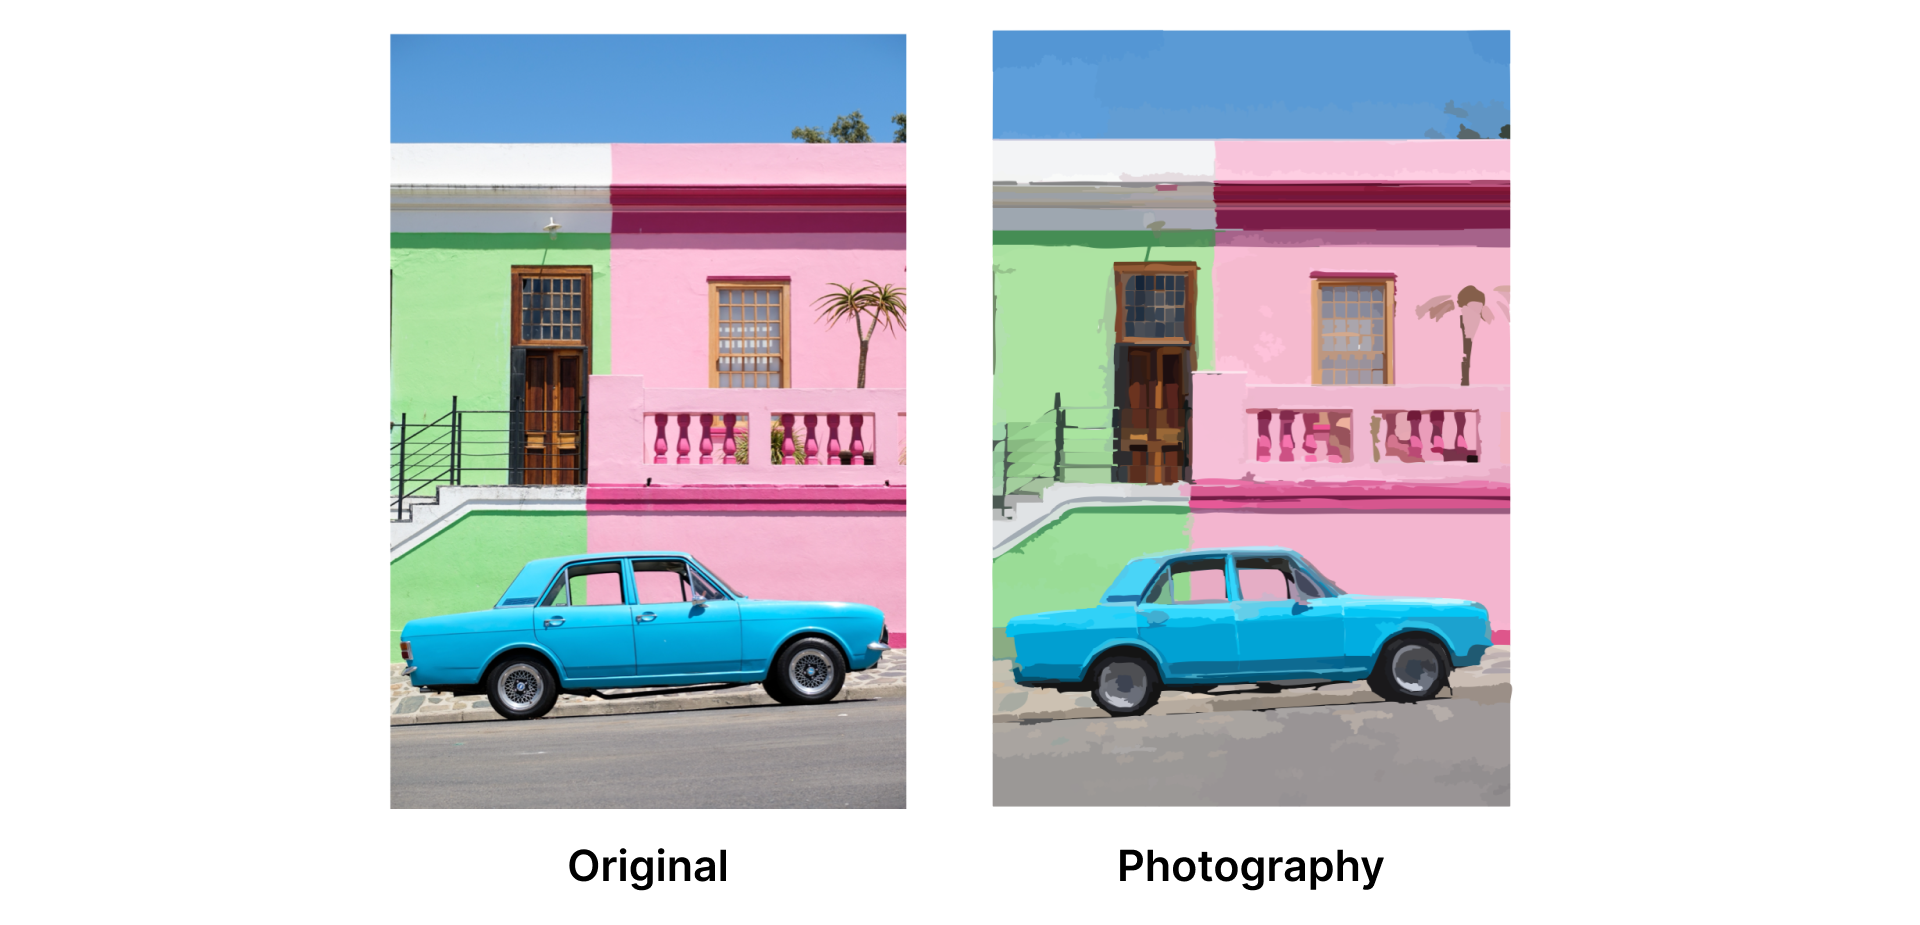 Two images of a blue car in front of a pink and green house